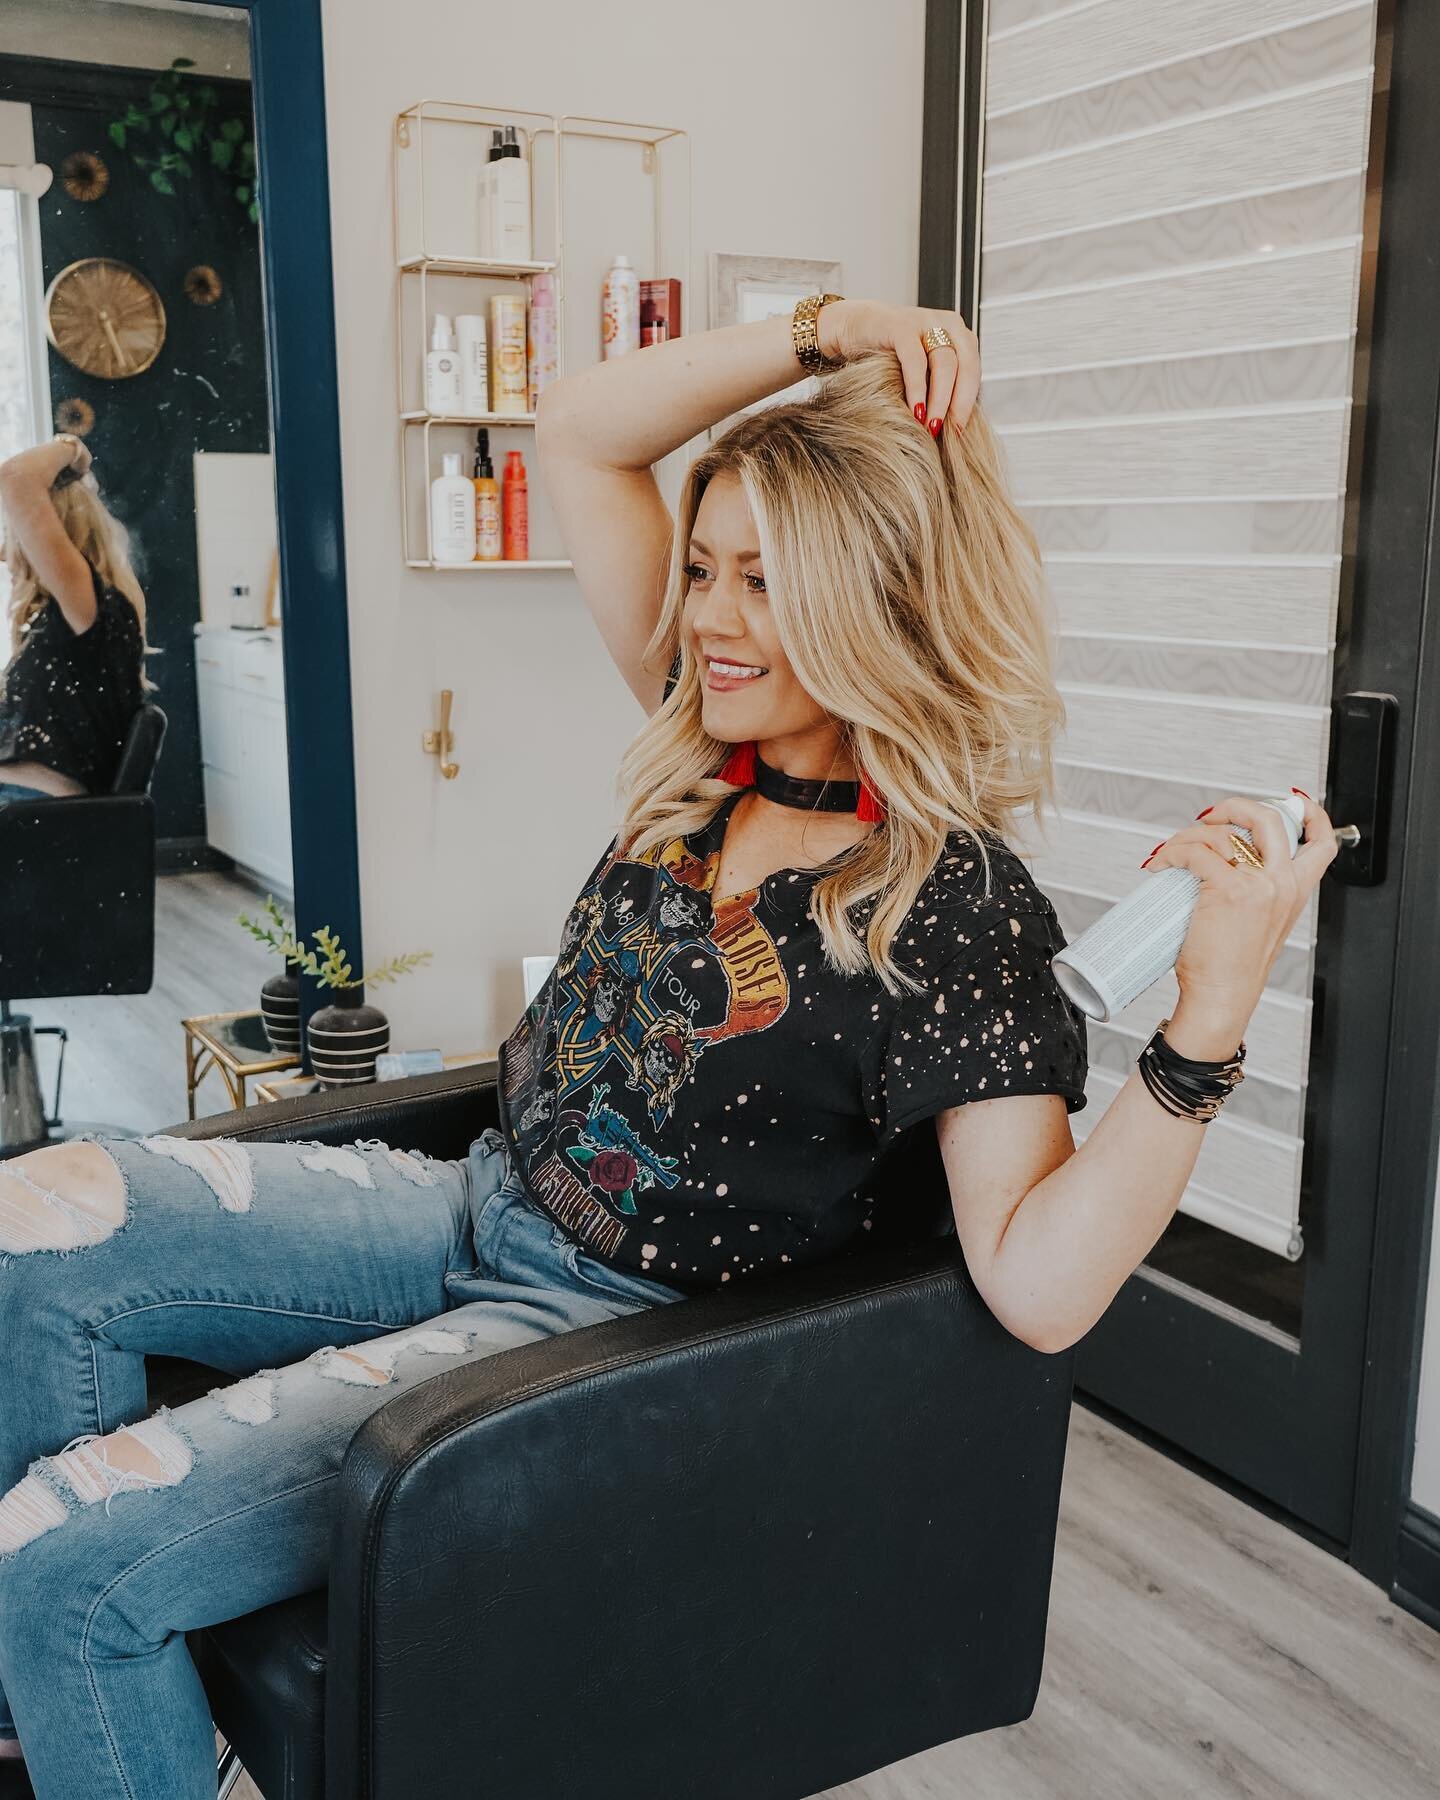 &ldquo;It doesn&rsquo;t matter if your life is perfect as long as your hair color is.&rdquo; &ndash; Stacy Snapp Killian
&bull;
&bull;
&bull;
&bull;
&bull;
&bull;
&bull;
&bull;
#luxsalonsuites #hairstyles #salonprofessional #cosmetology #blondes #bea